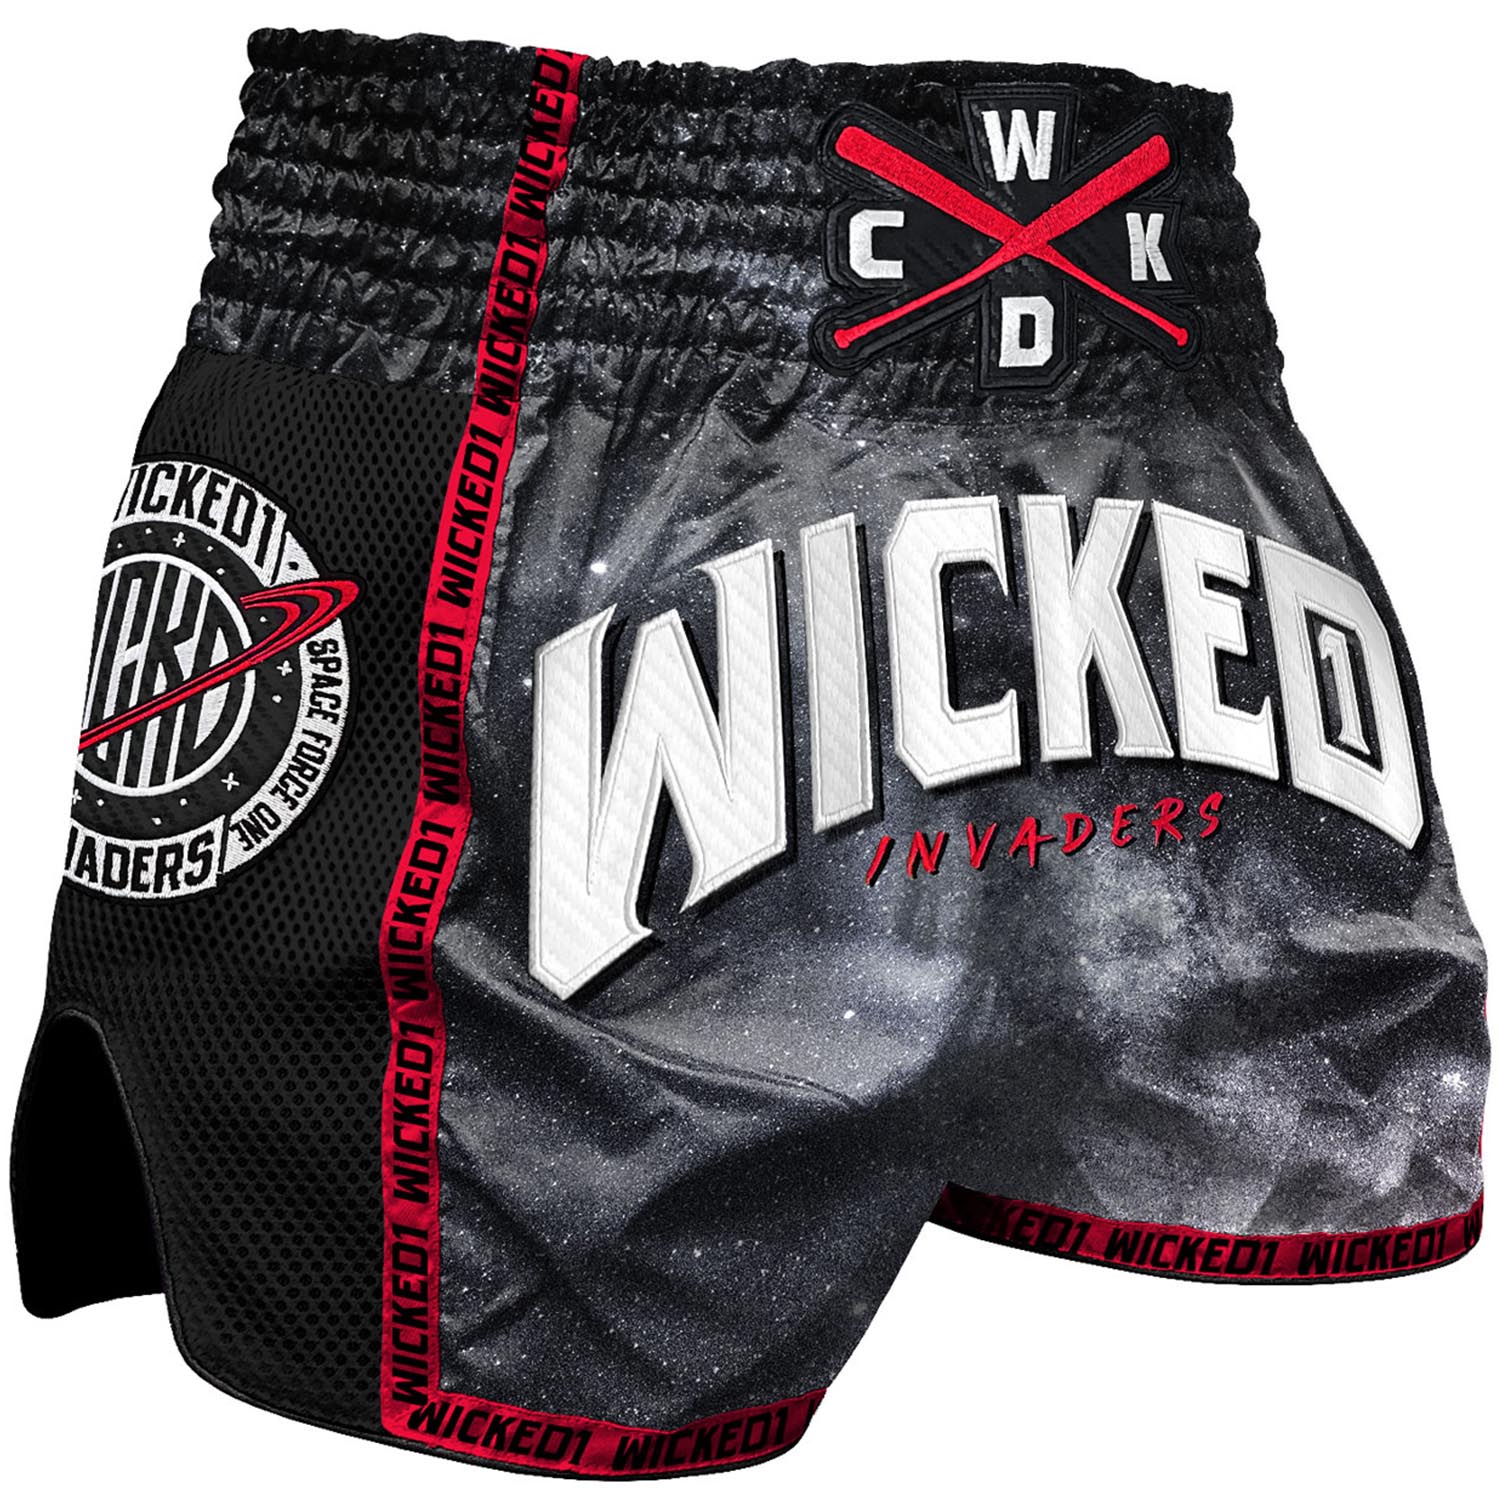 Wicked One Muay Thai Shorts, Invaders, schwarz-rot, XL